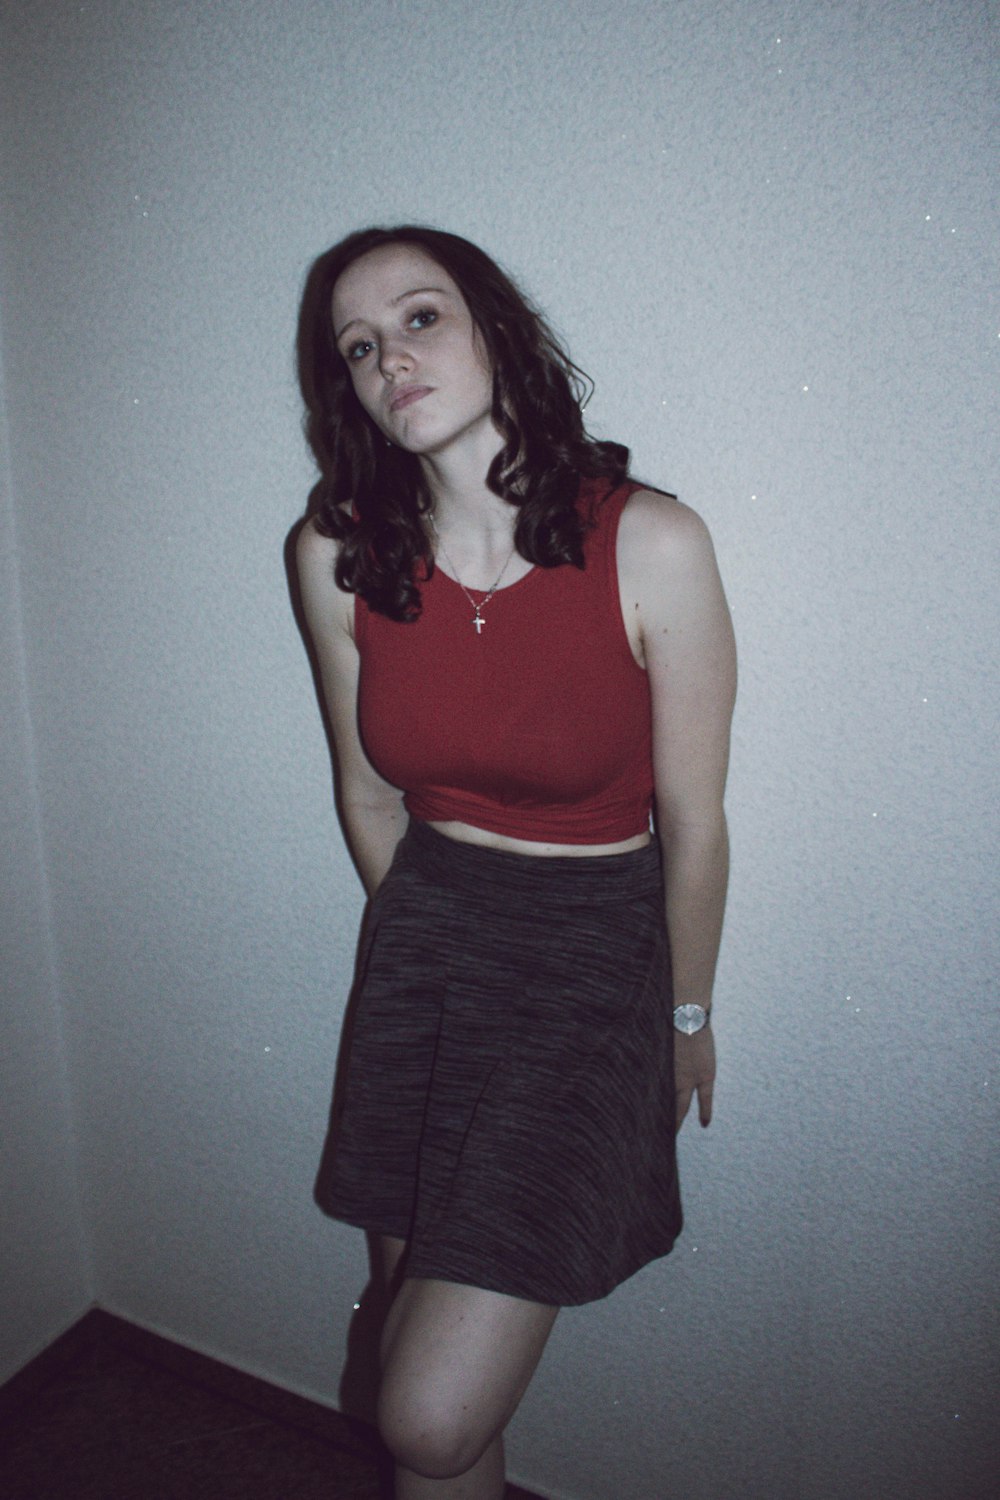 woman wearing red top and gray skirt leaning on wall